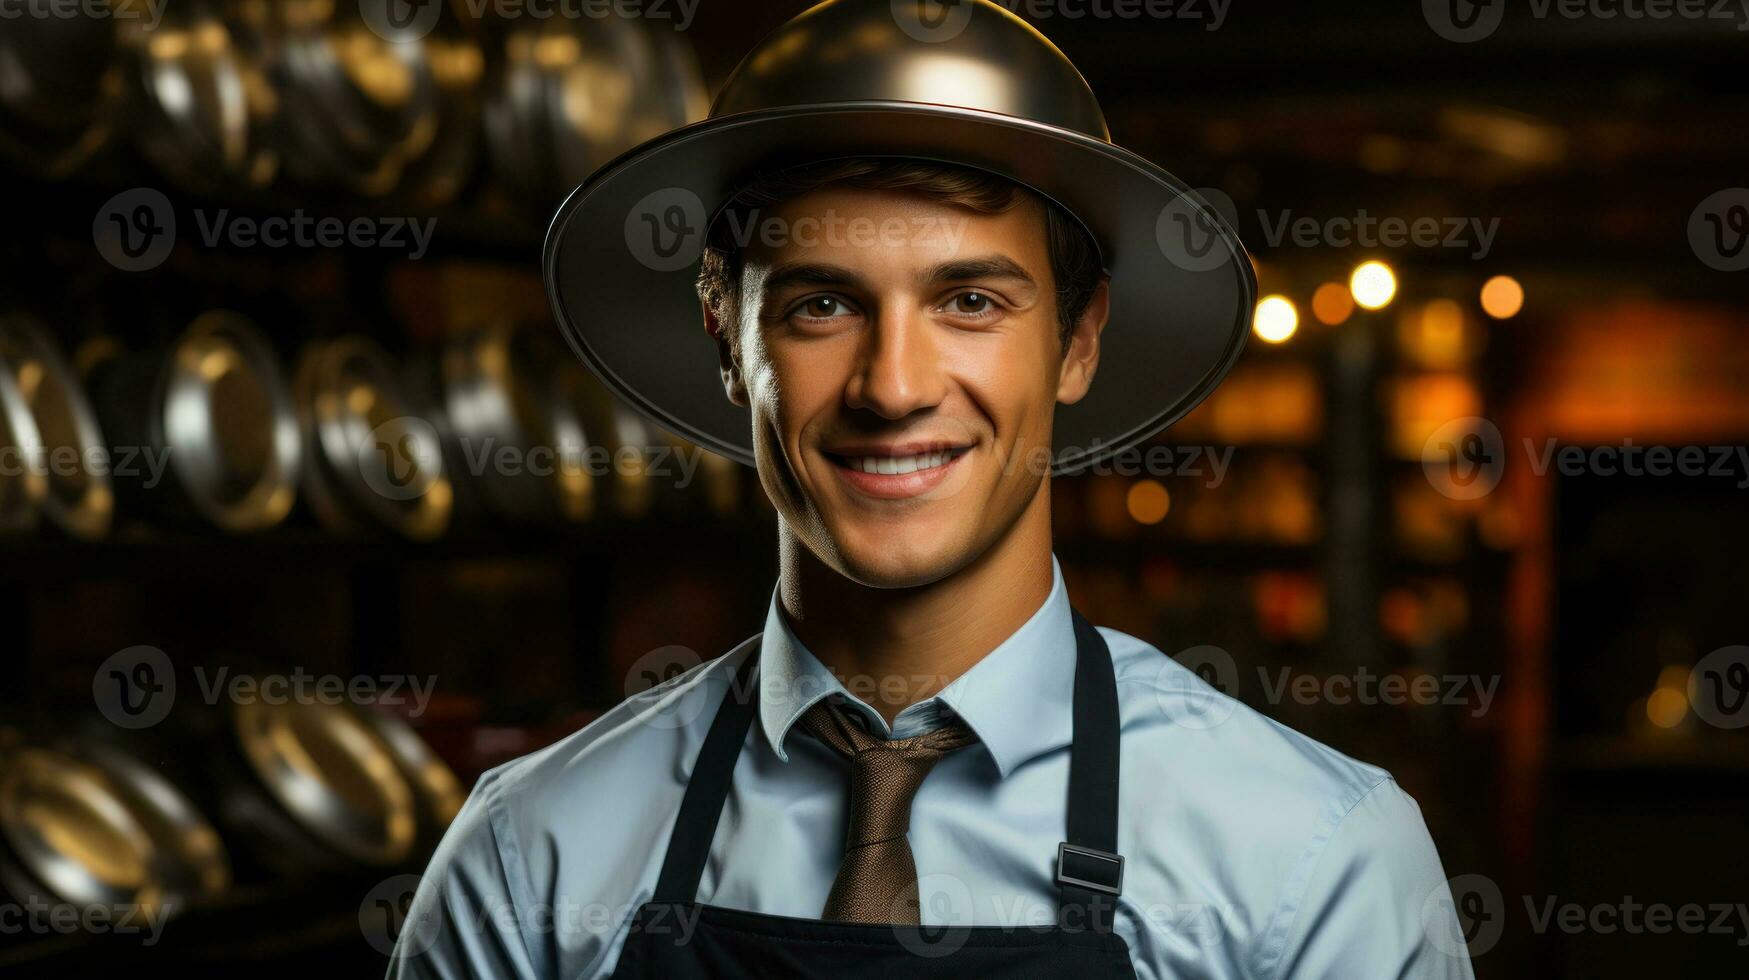 Portrait of a funny young man in apron and pan steel hat standing in a cellar. photo